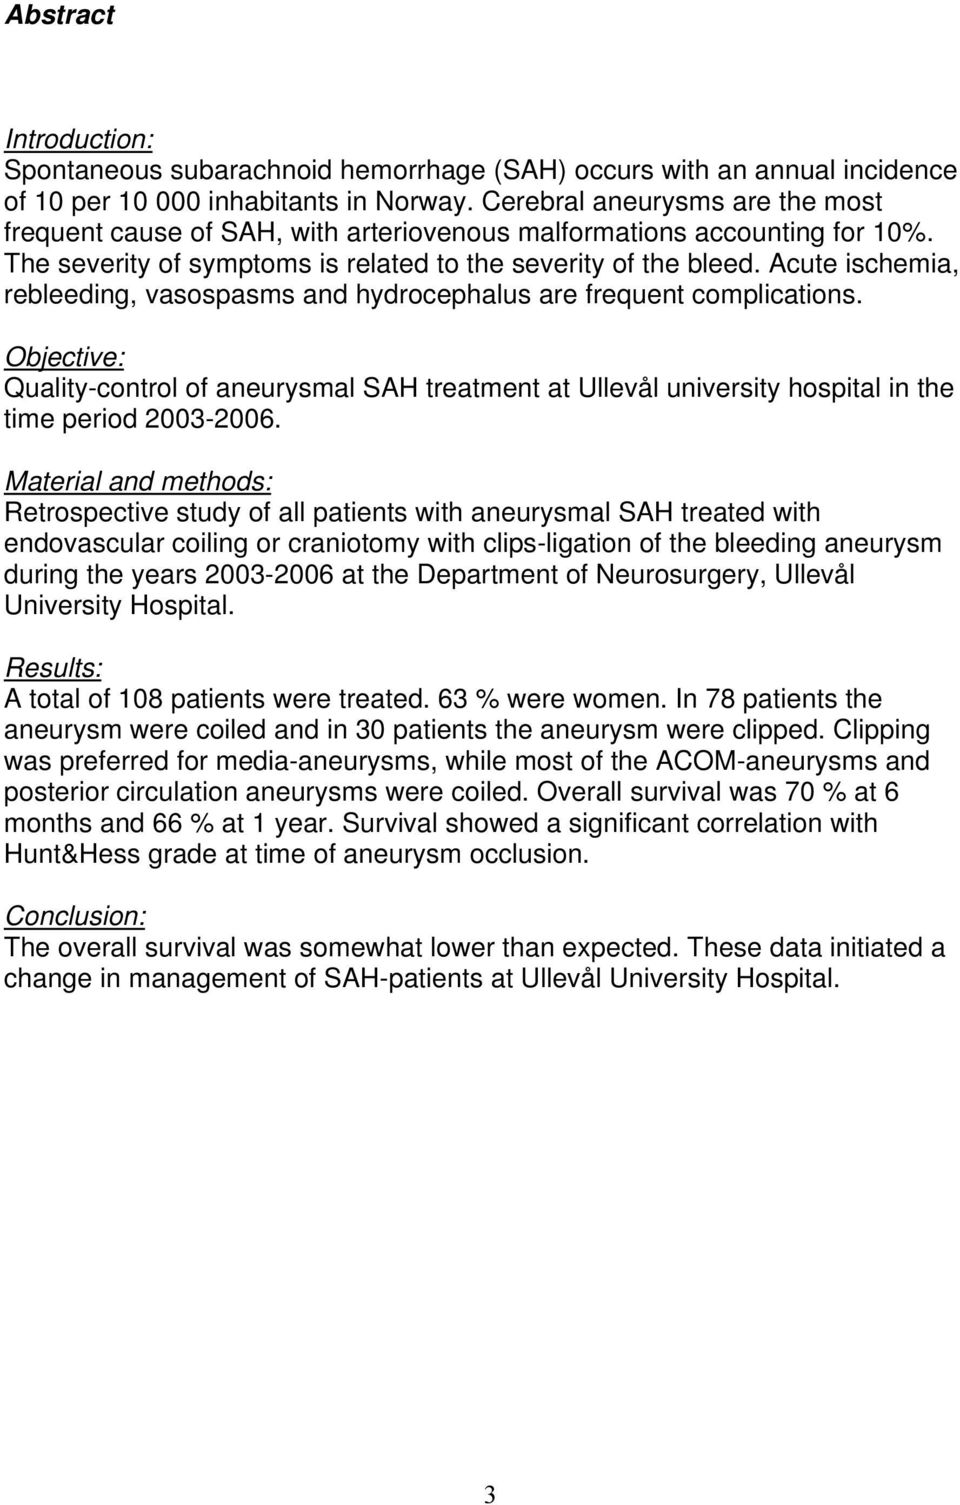 Acute ischemia, rebleeding, vasospasms and hydrocephalus are frequent complications. Objective: Quality-control of aneurysmal SAH treatment at Ullevål university hospital in the time period 2003-2006.